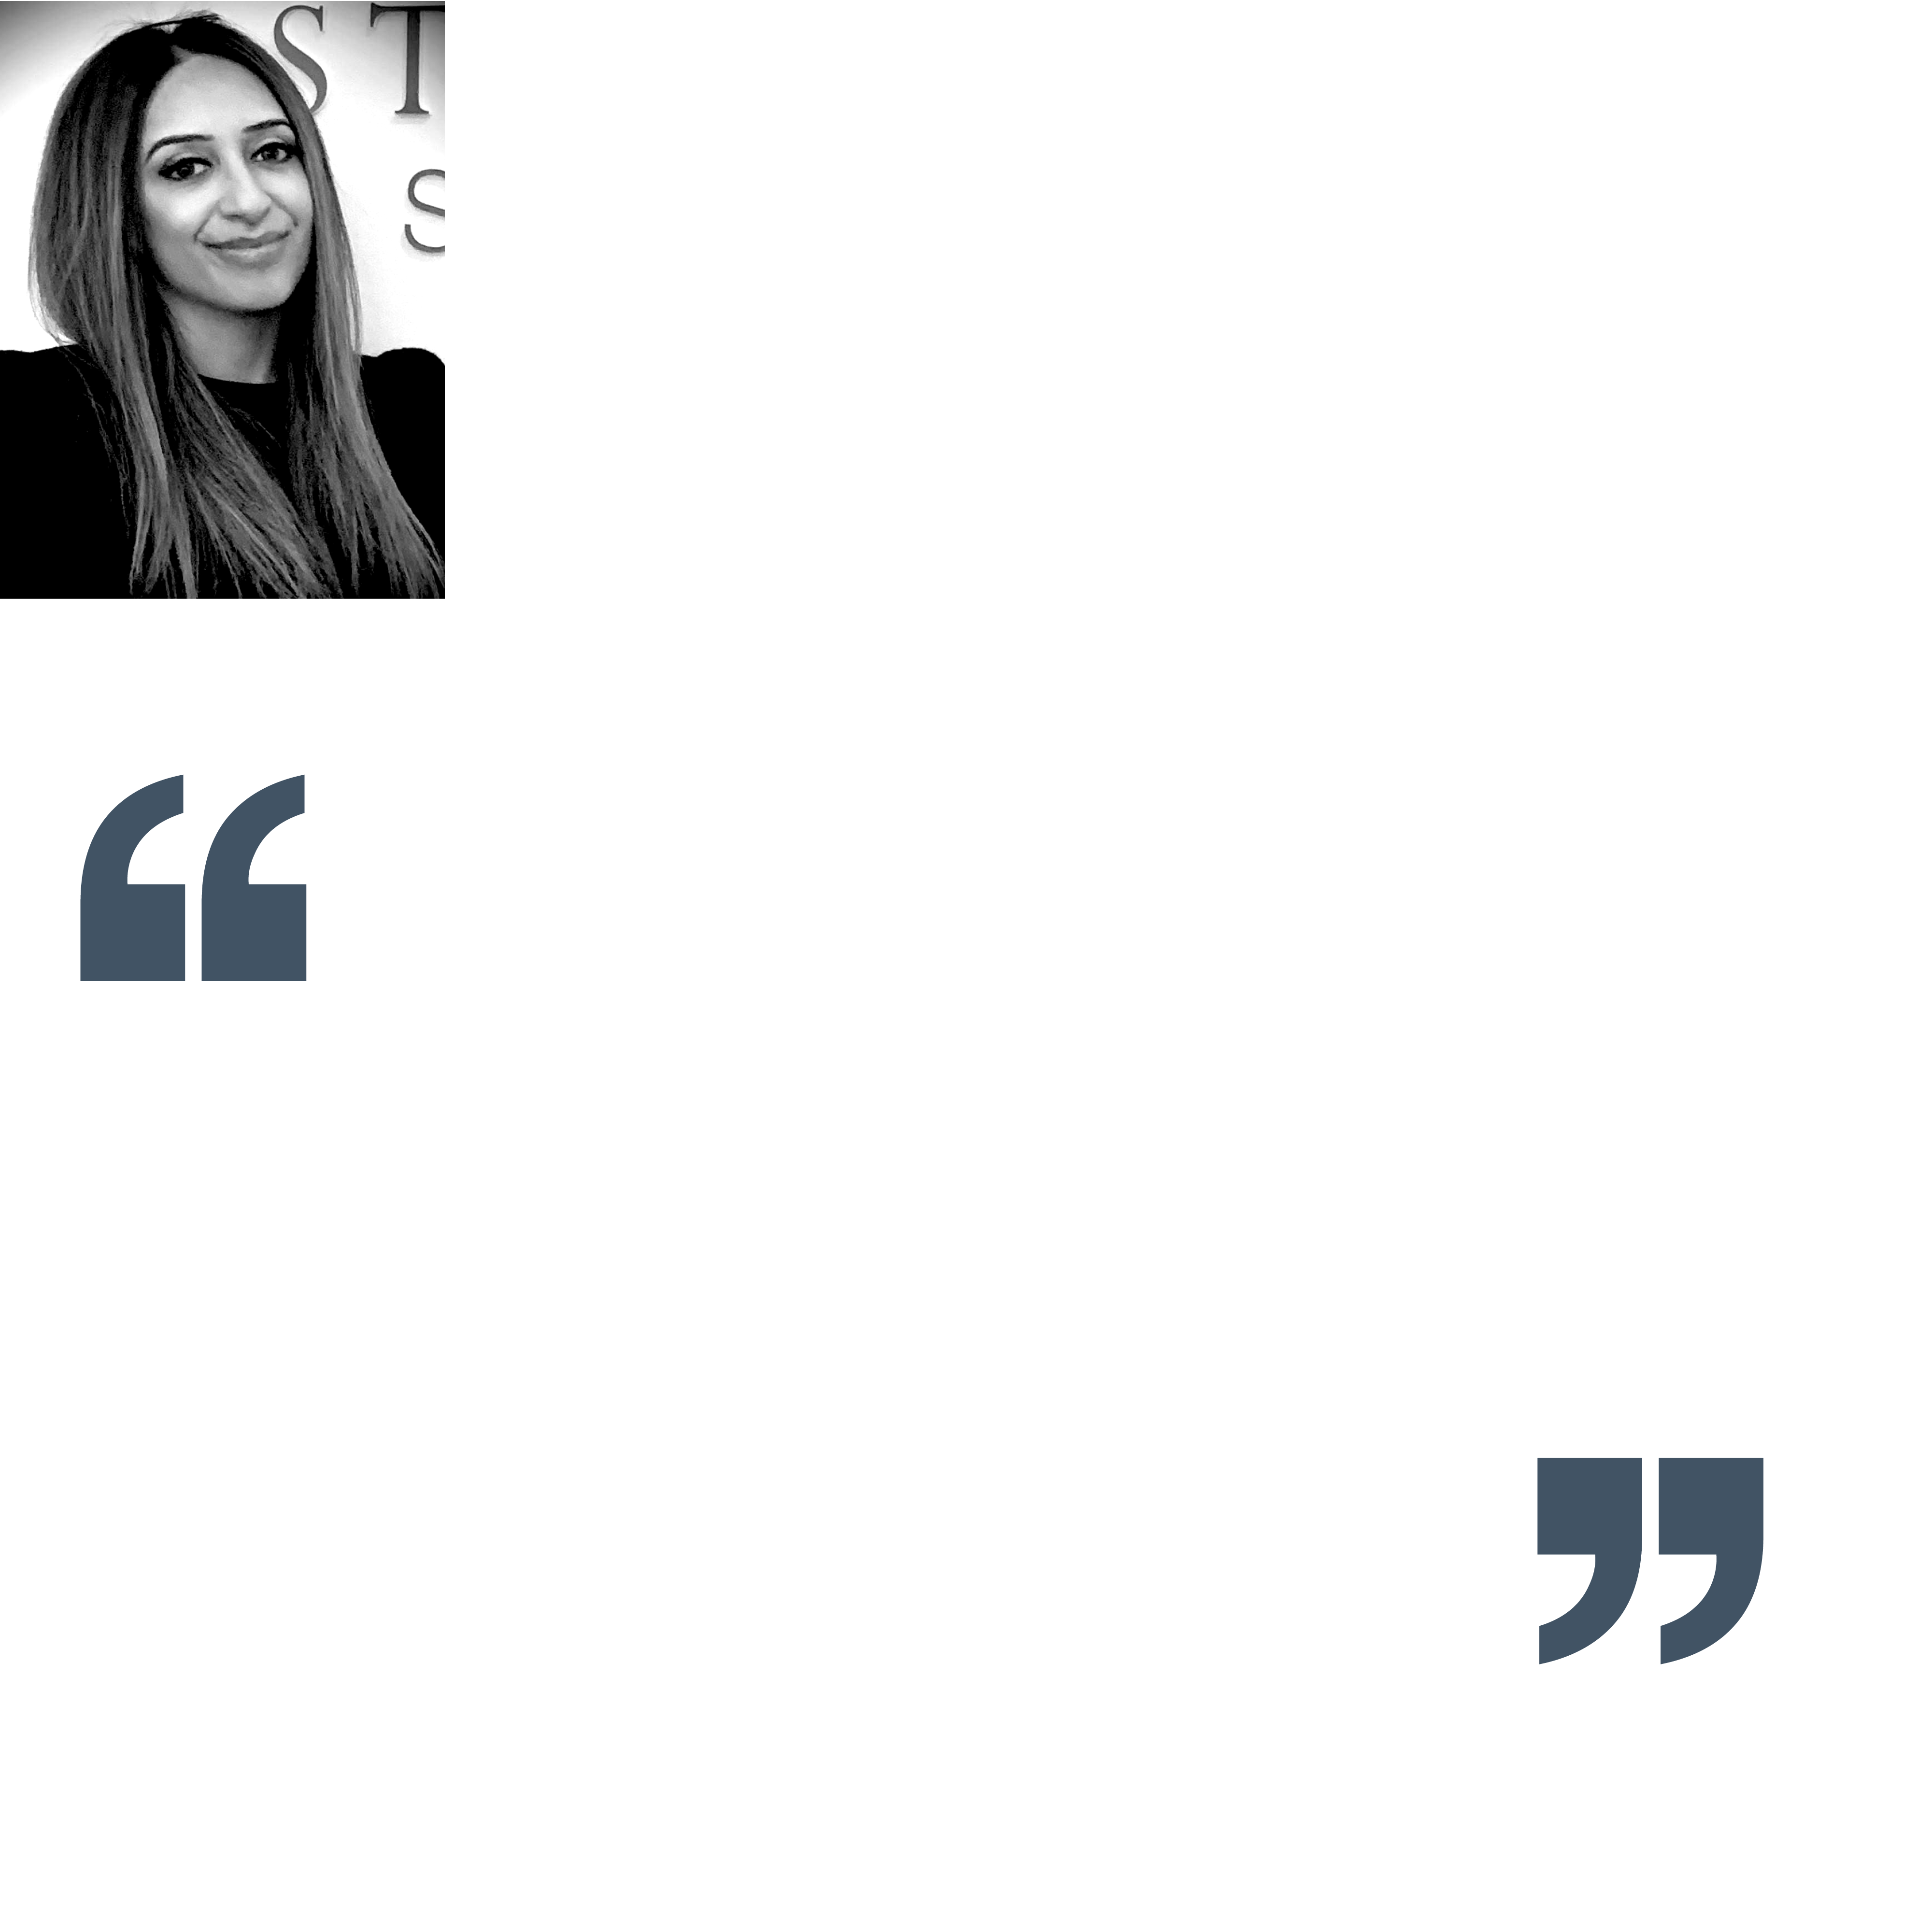 Quote from Pam Sanghera, Director, Charles Strachan Solicitors. “The opportunity to work and study law at the same time was very important to me, as it allowed me to obtain practical work experience to hit the ground running. The CILEX route has enabled me to specialise early and be recognised as an award-winning international family lawyer."